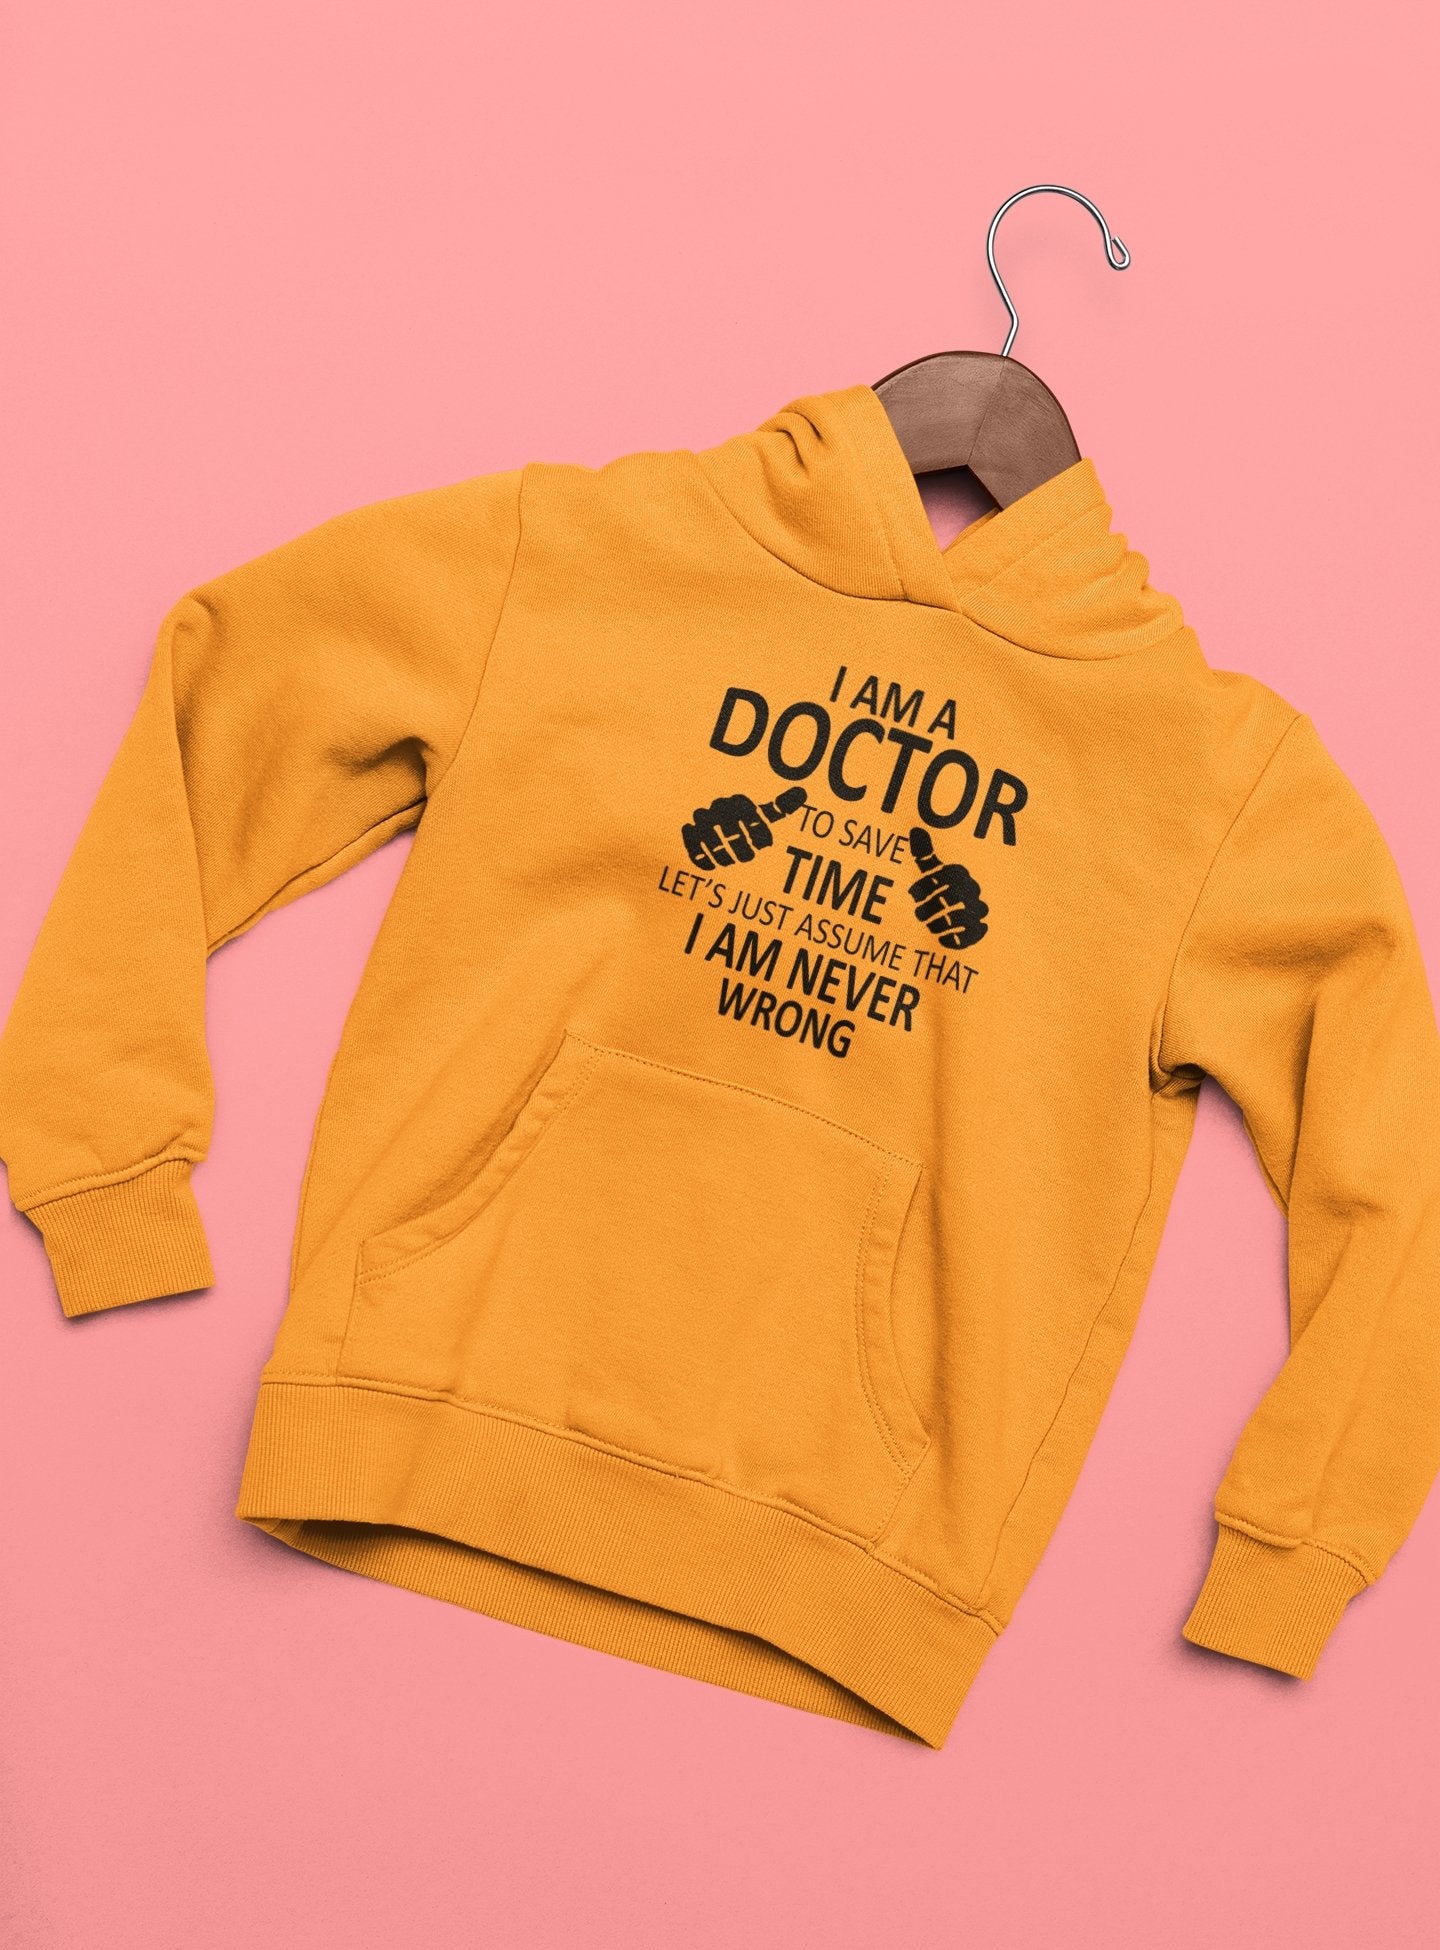 I Am A Doctor Never Wrong Hoodies for Women-FunkyTeesClub - Funky Tees Club